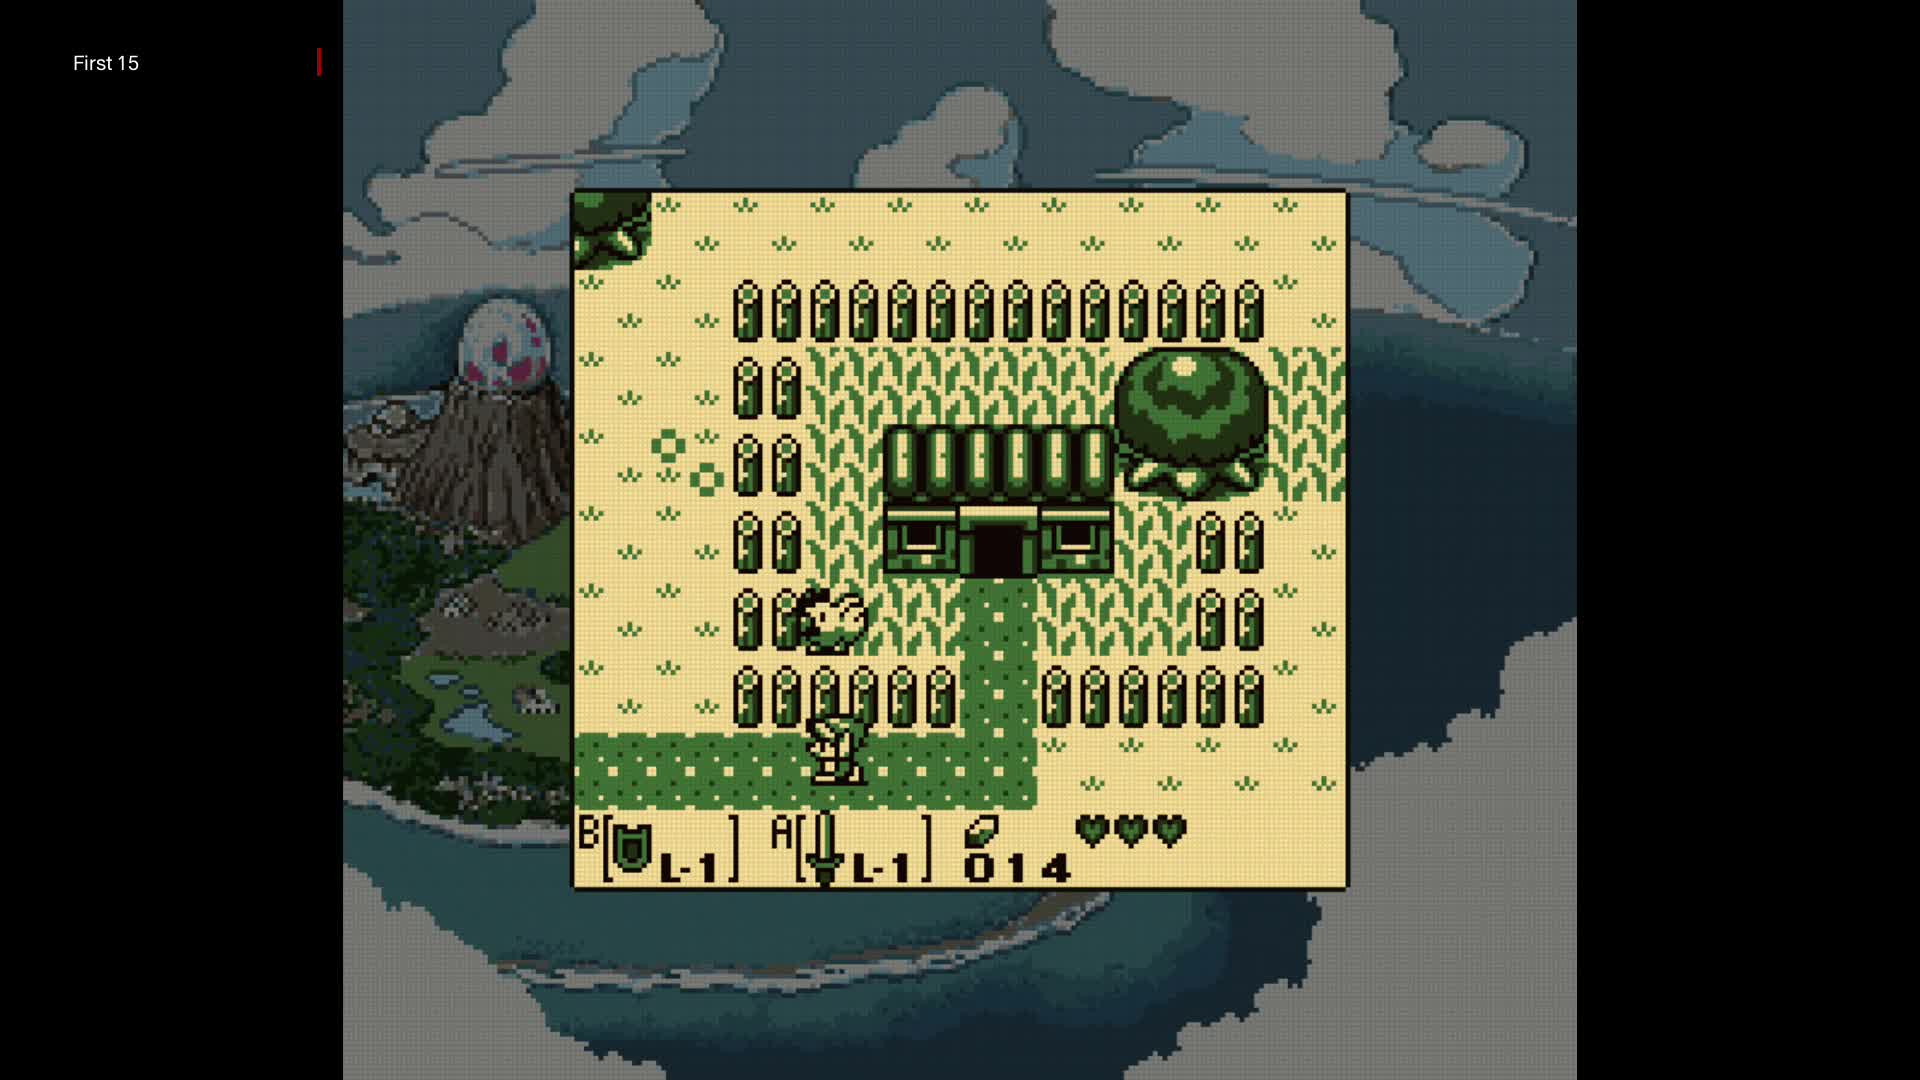 The First 15 Mintues of The Legend of Zelda: Links Awakening DX (Game Boy Color)